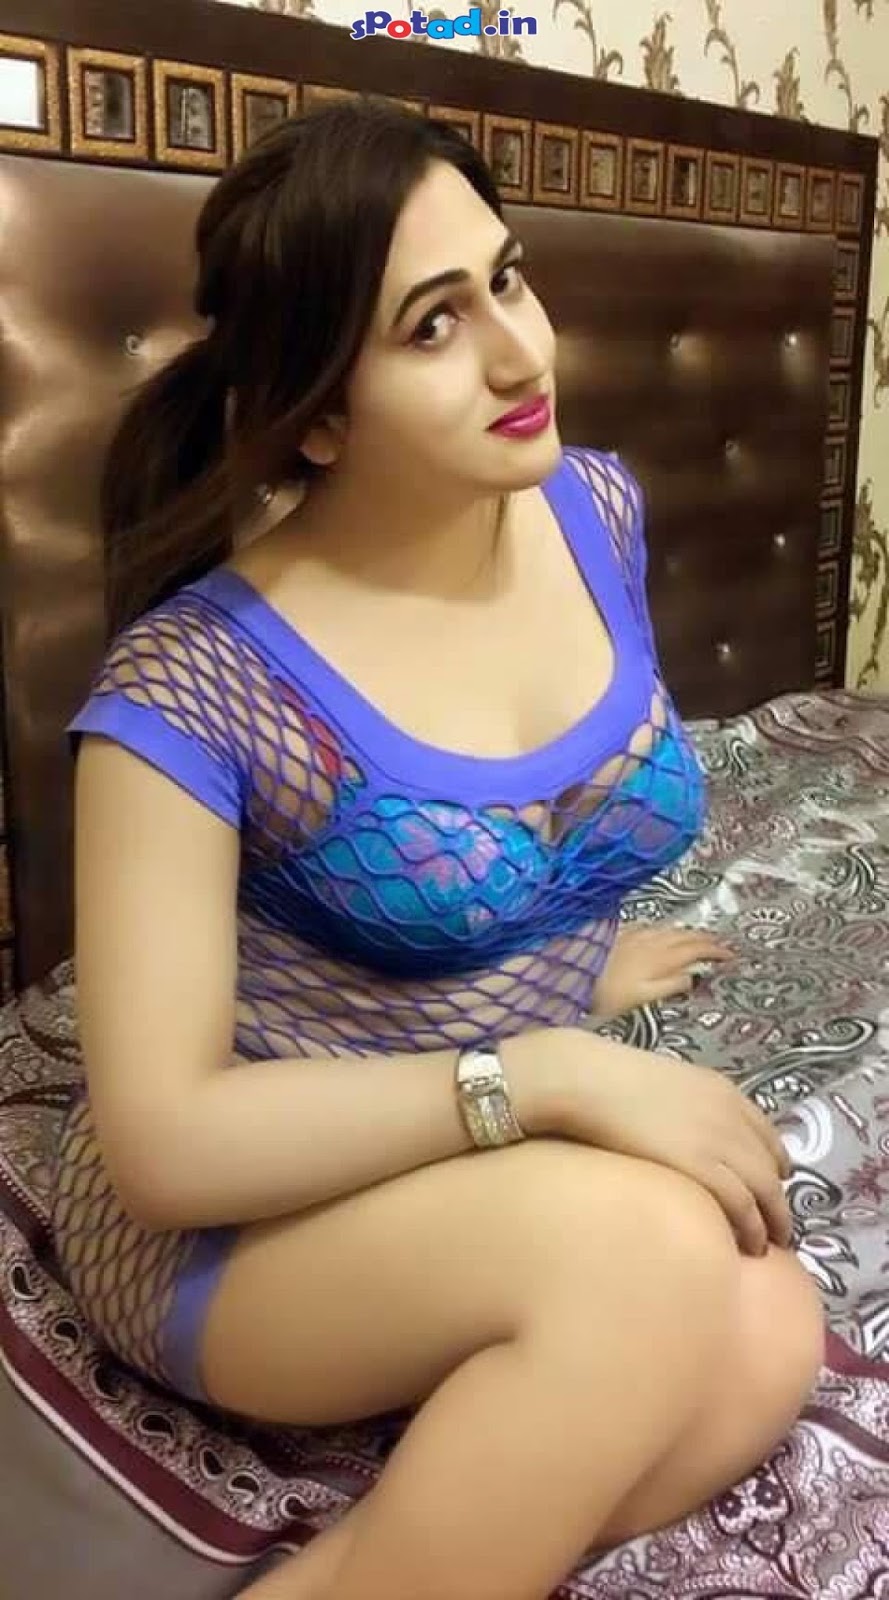 Call Girl Mobile Numbers From India Friendship - Samestudy-3674